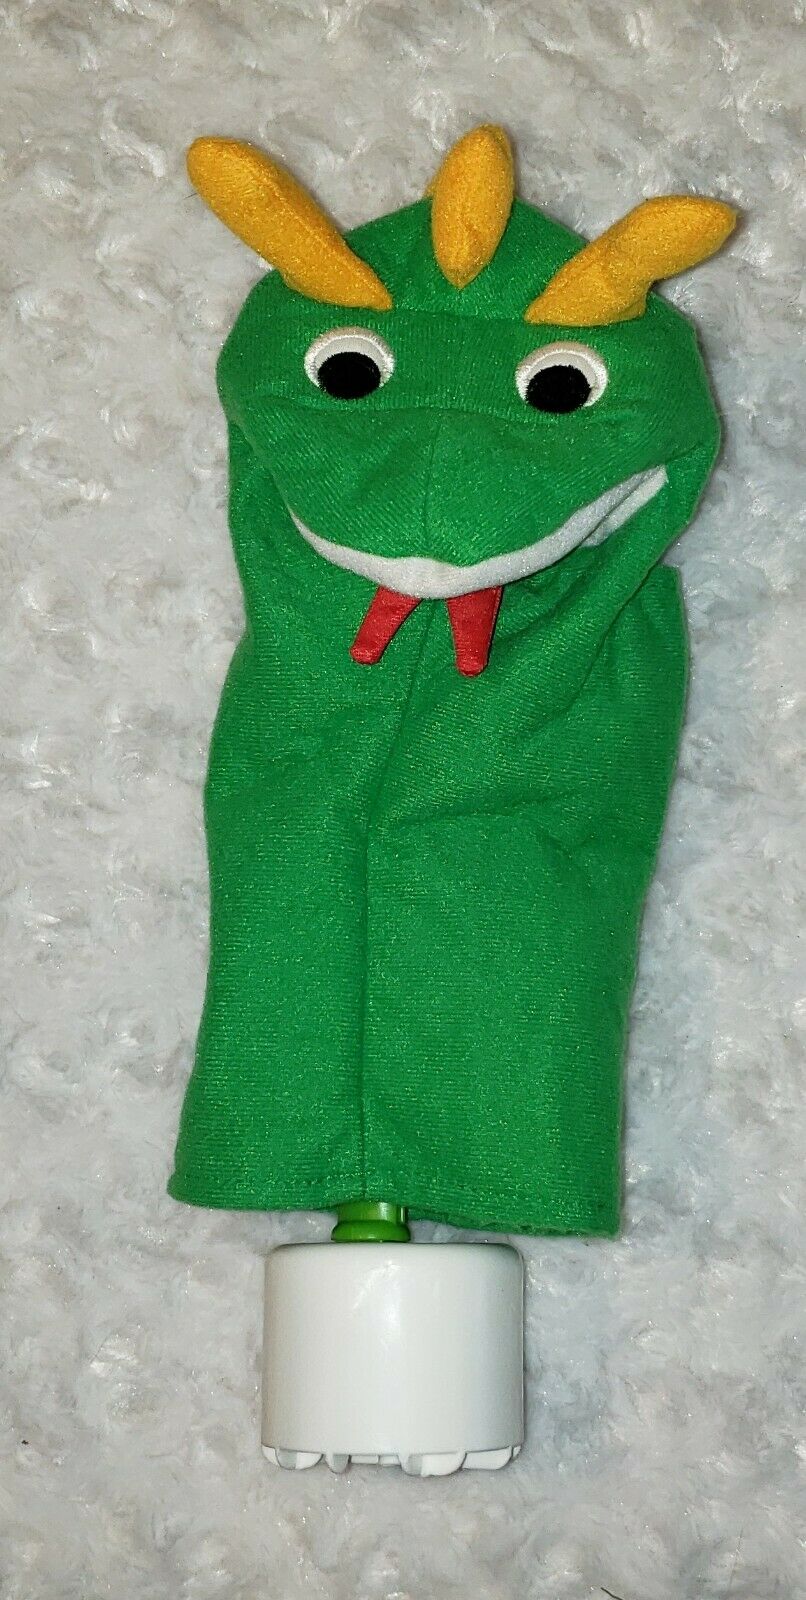 Graco Baby Einstein Discover Exersaucer Green Dragon Puppet Replacement